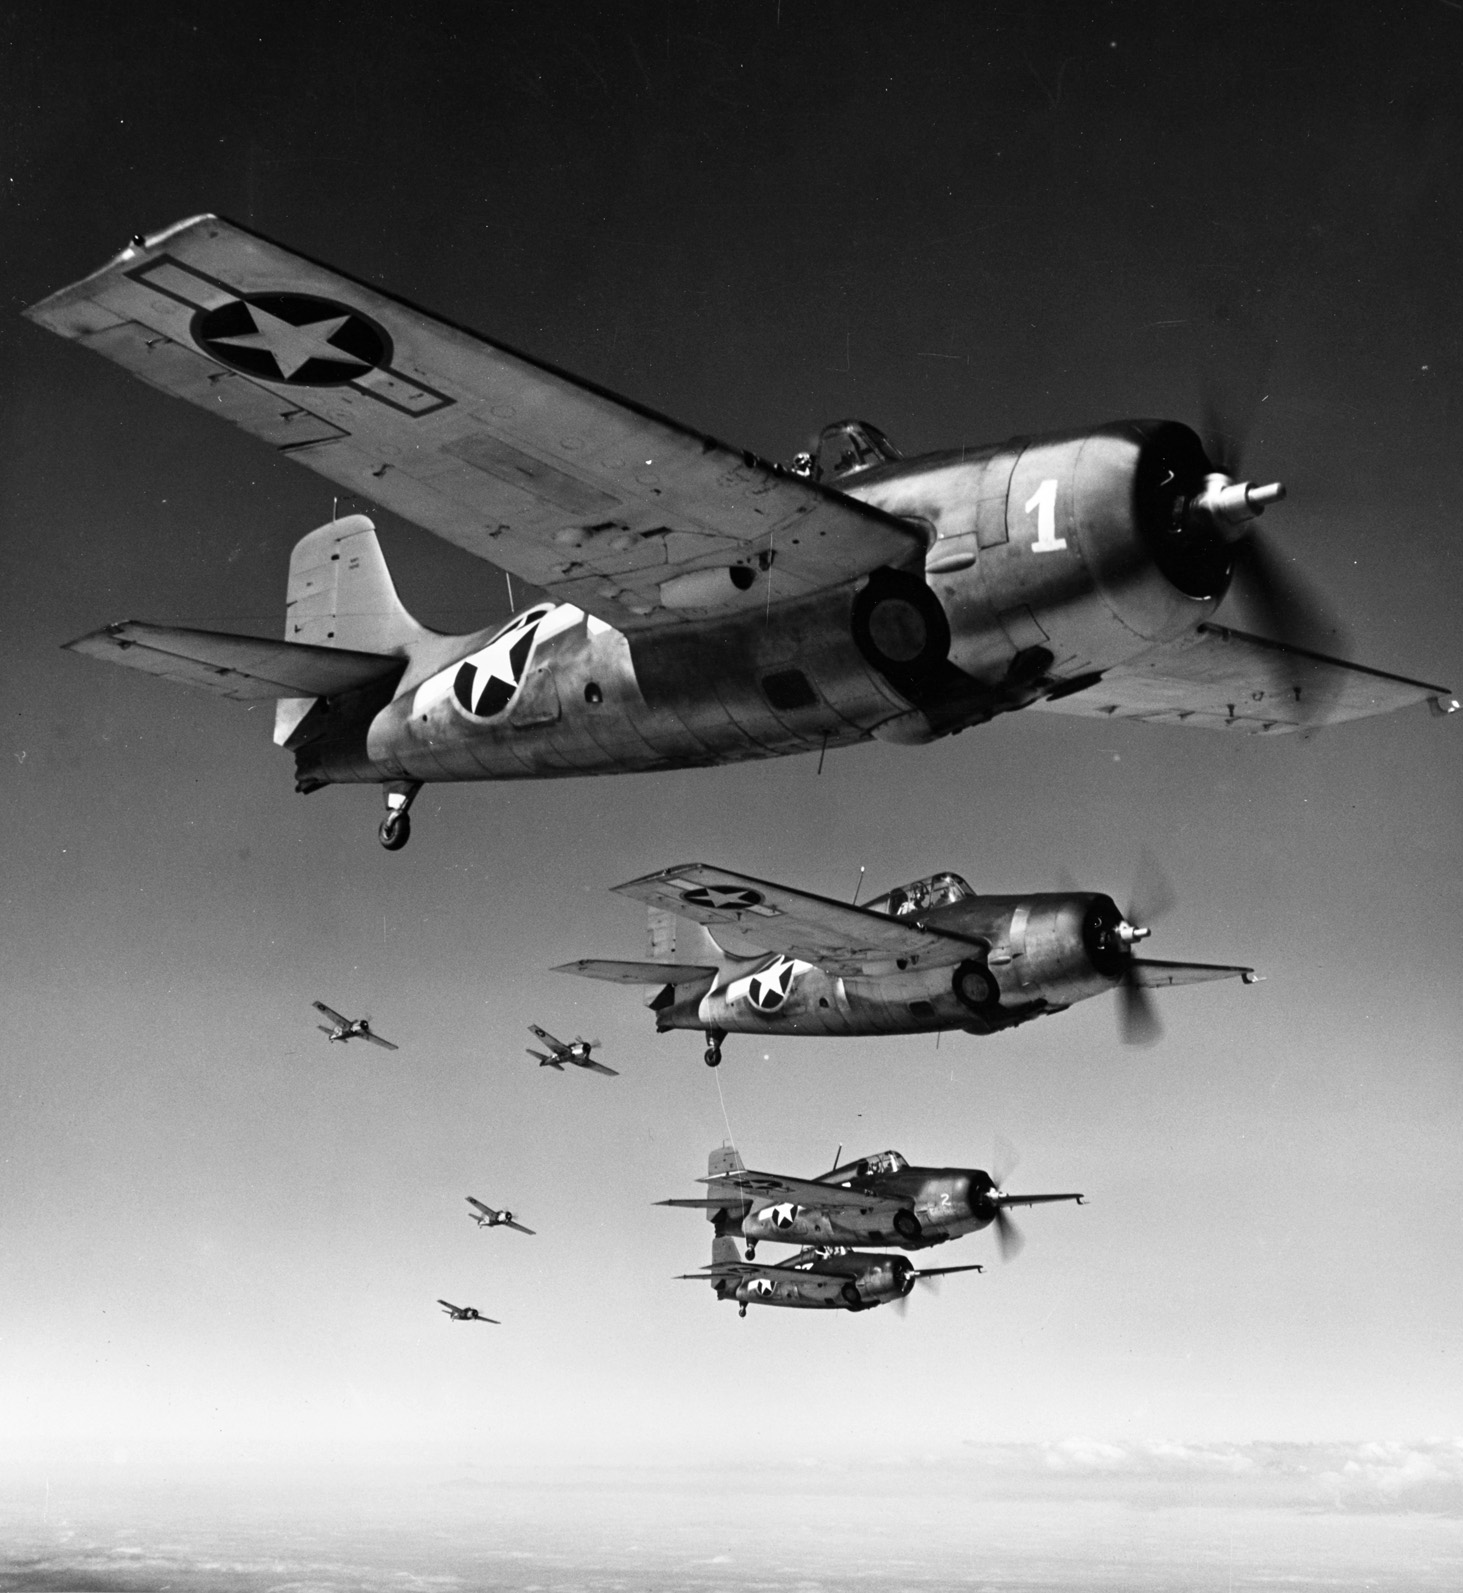 A flight of Grumman F4F Wildcats in tactical formation, mid-1943. The F4F was a tough opponent that could dish out punishment as well as take it.